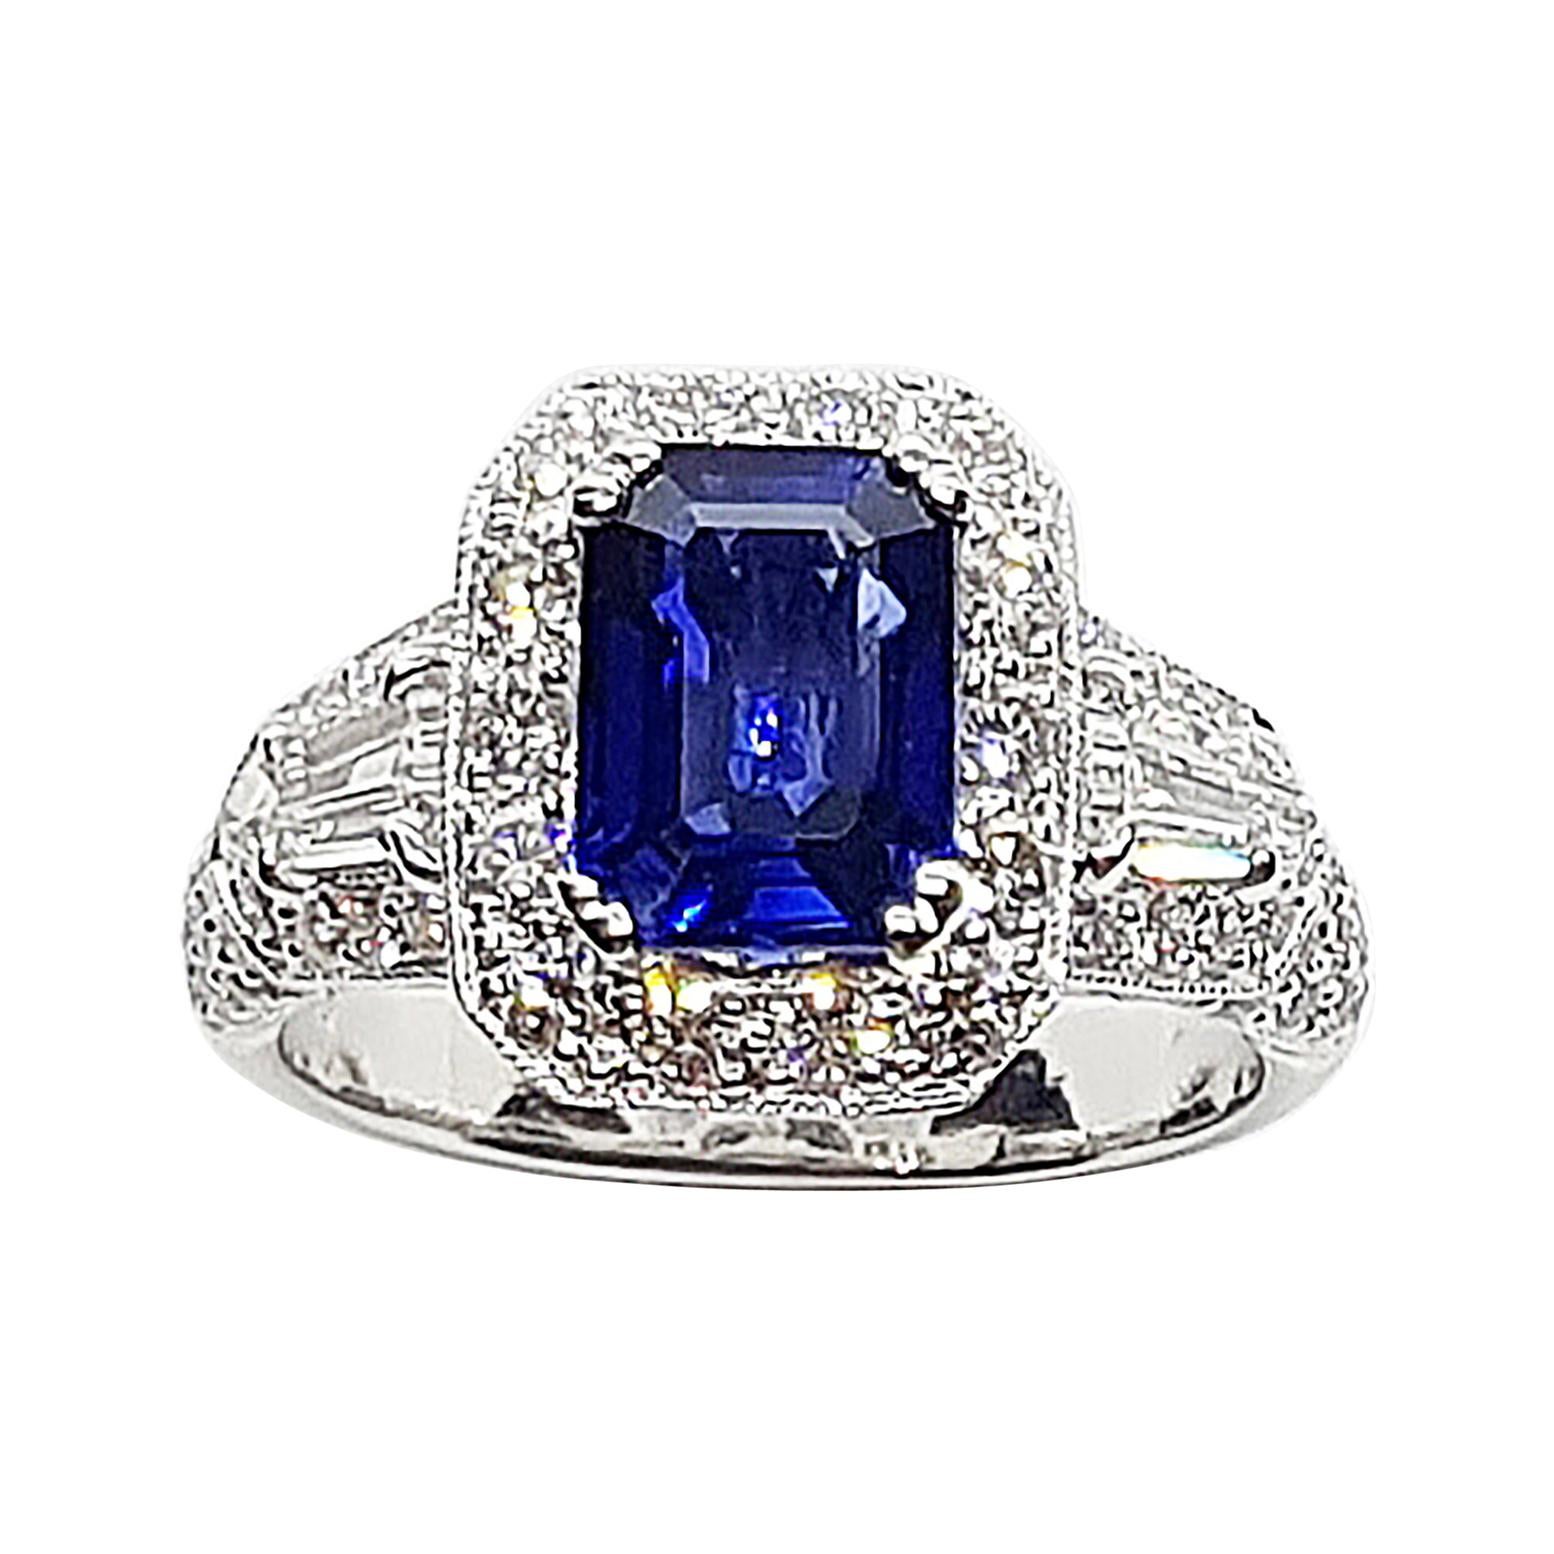 GIA Certified 1.83 Cts Blue Sapphire with Diamond Ring Set in Platinum 950